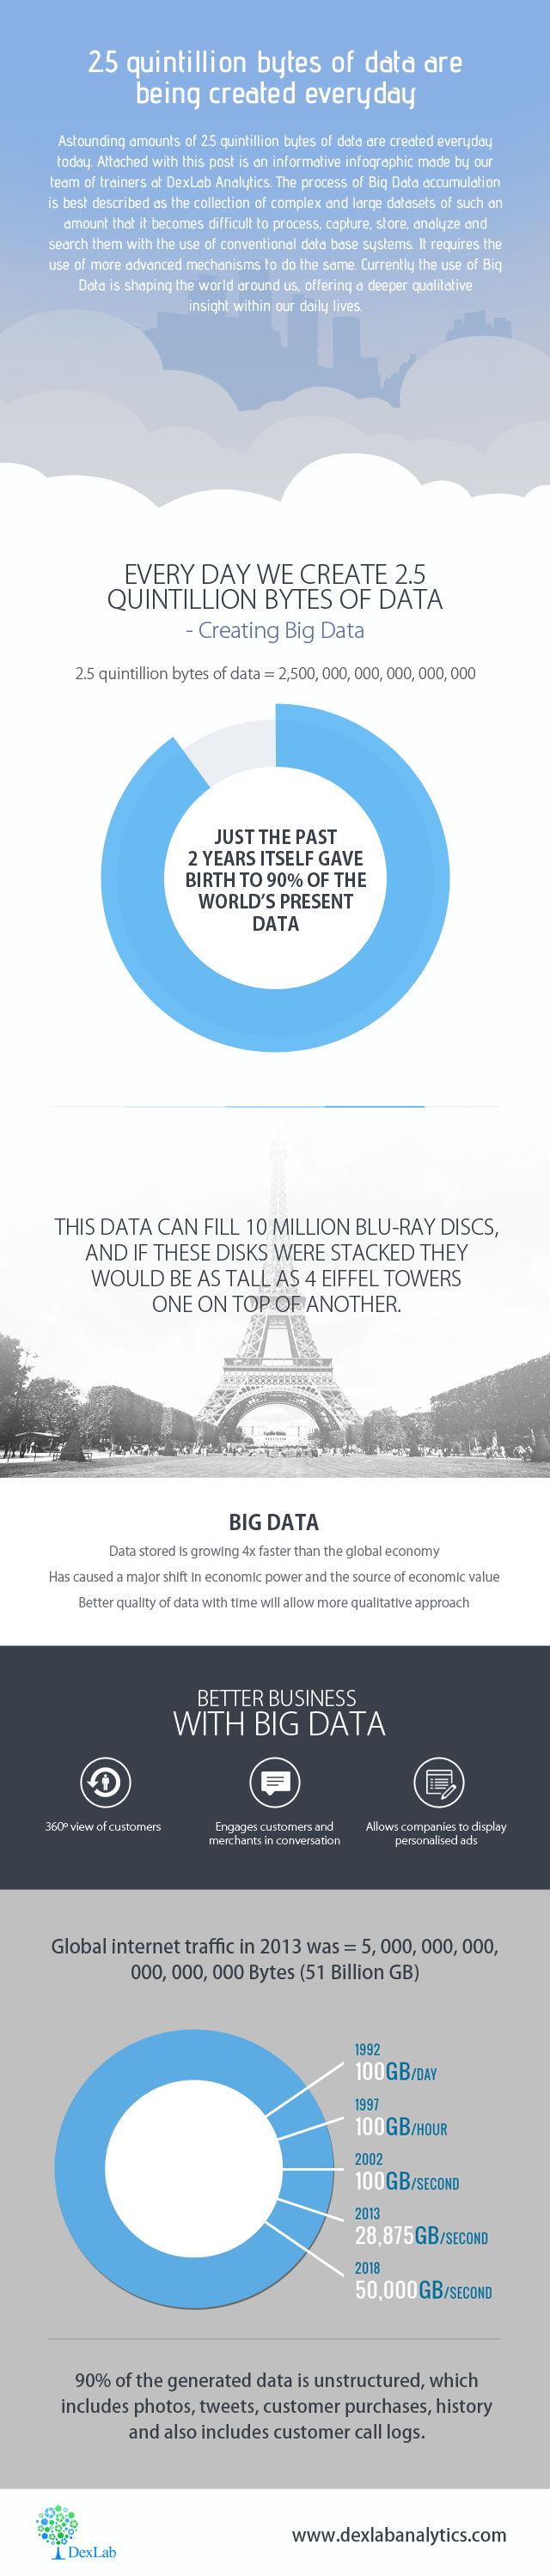 2.5 Quintillion Bytes of Data are Being Created Everyday